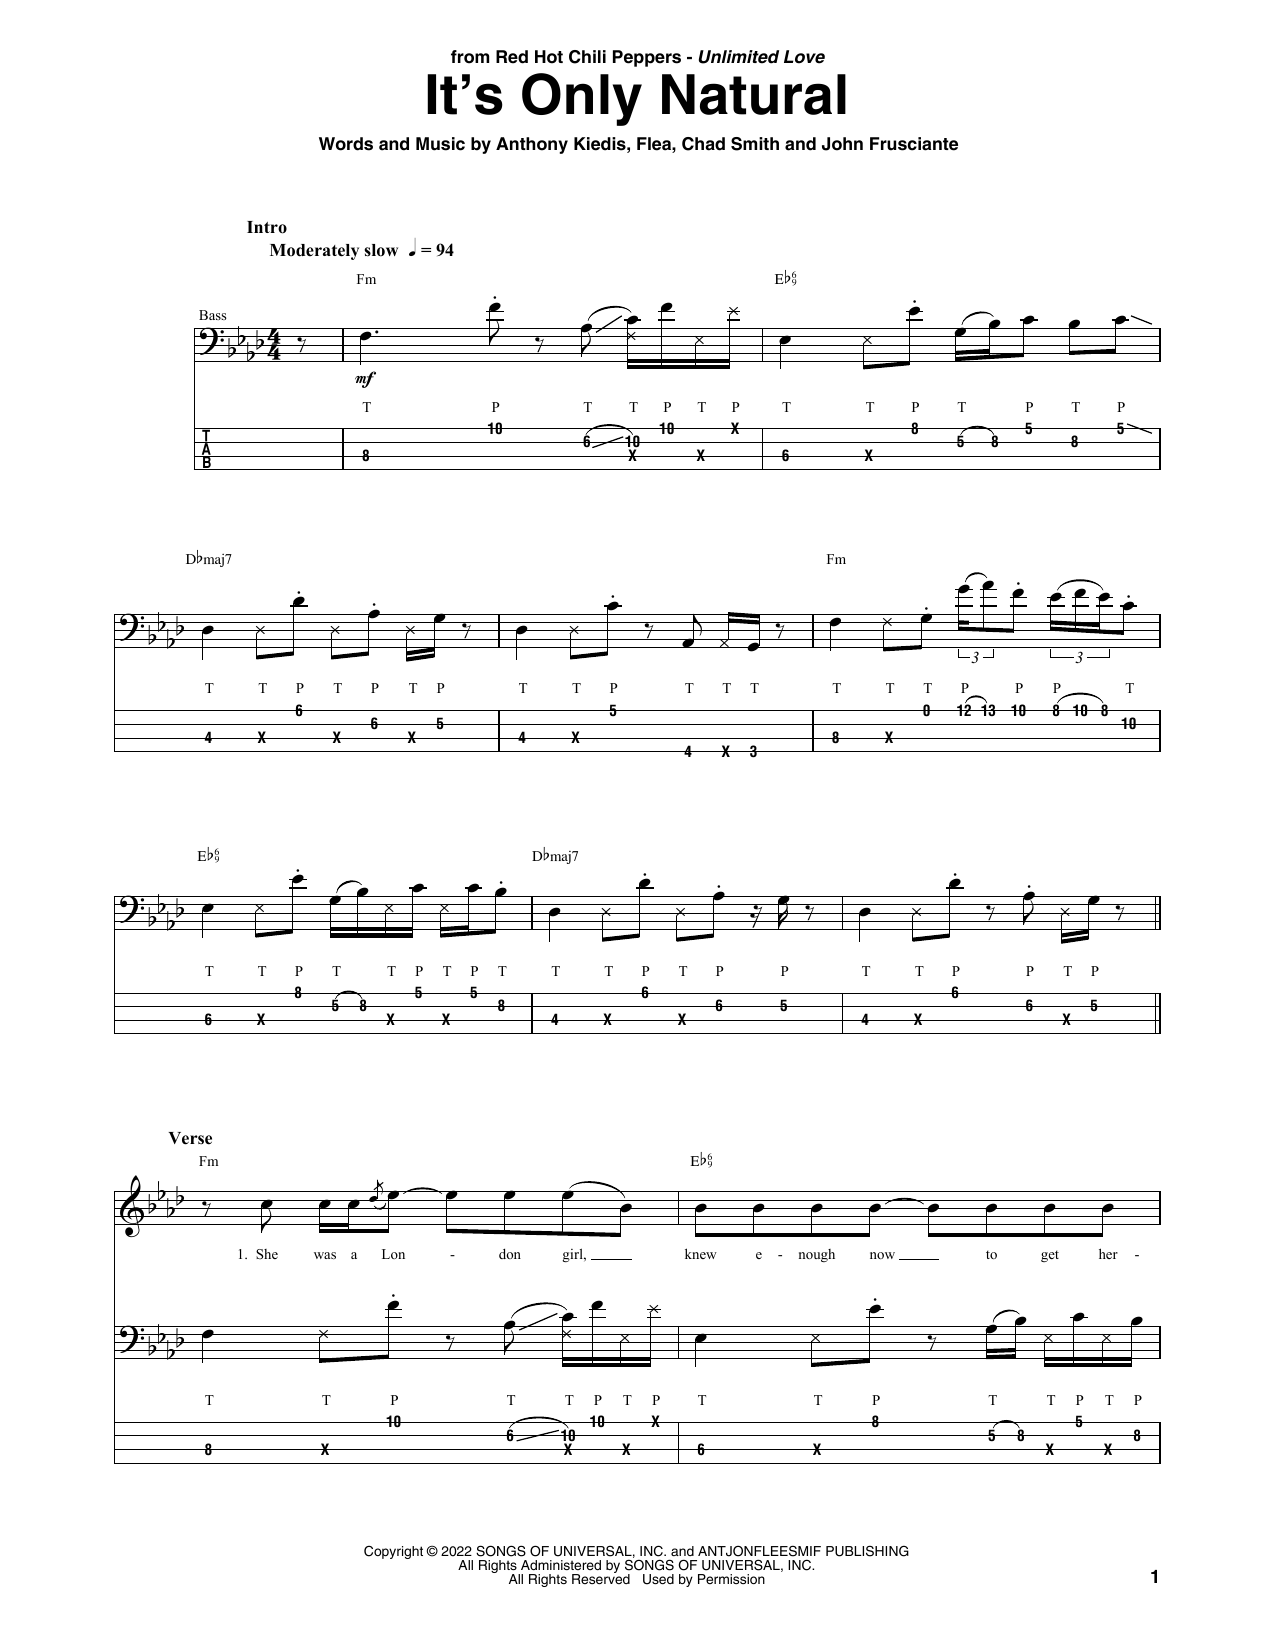 Download Red Hot Chili Peppers It's Only Natural Sheet Music